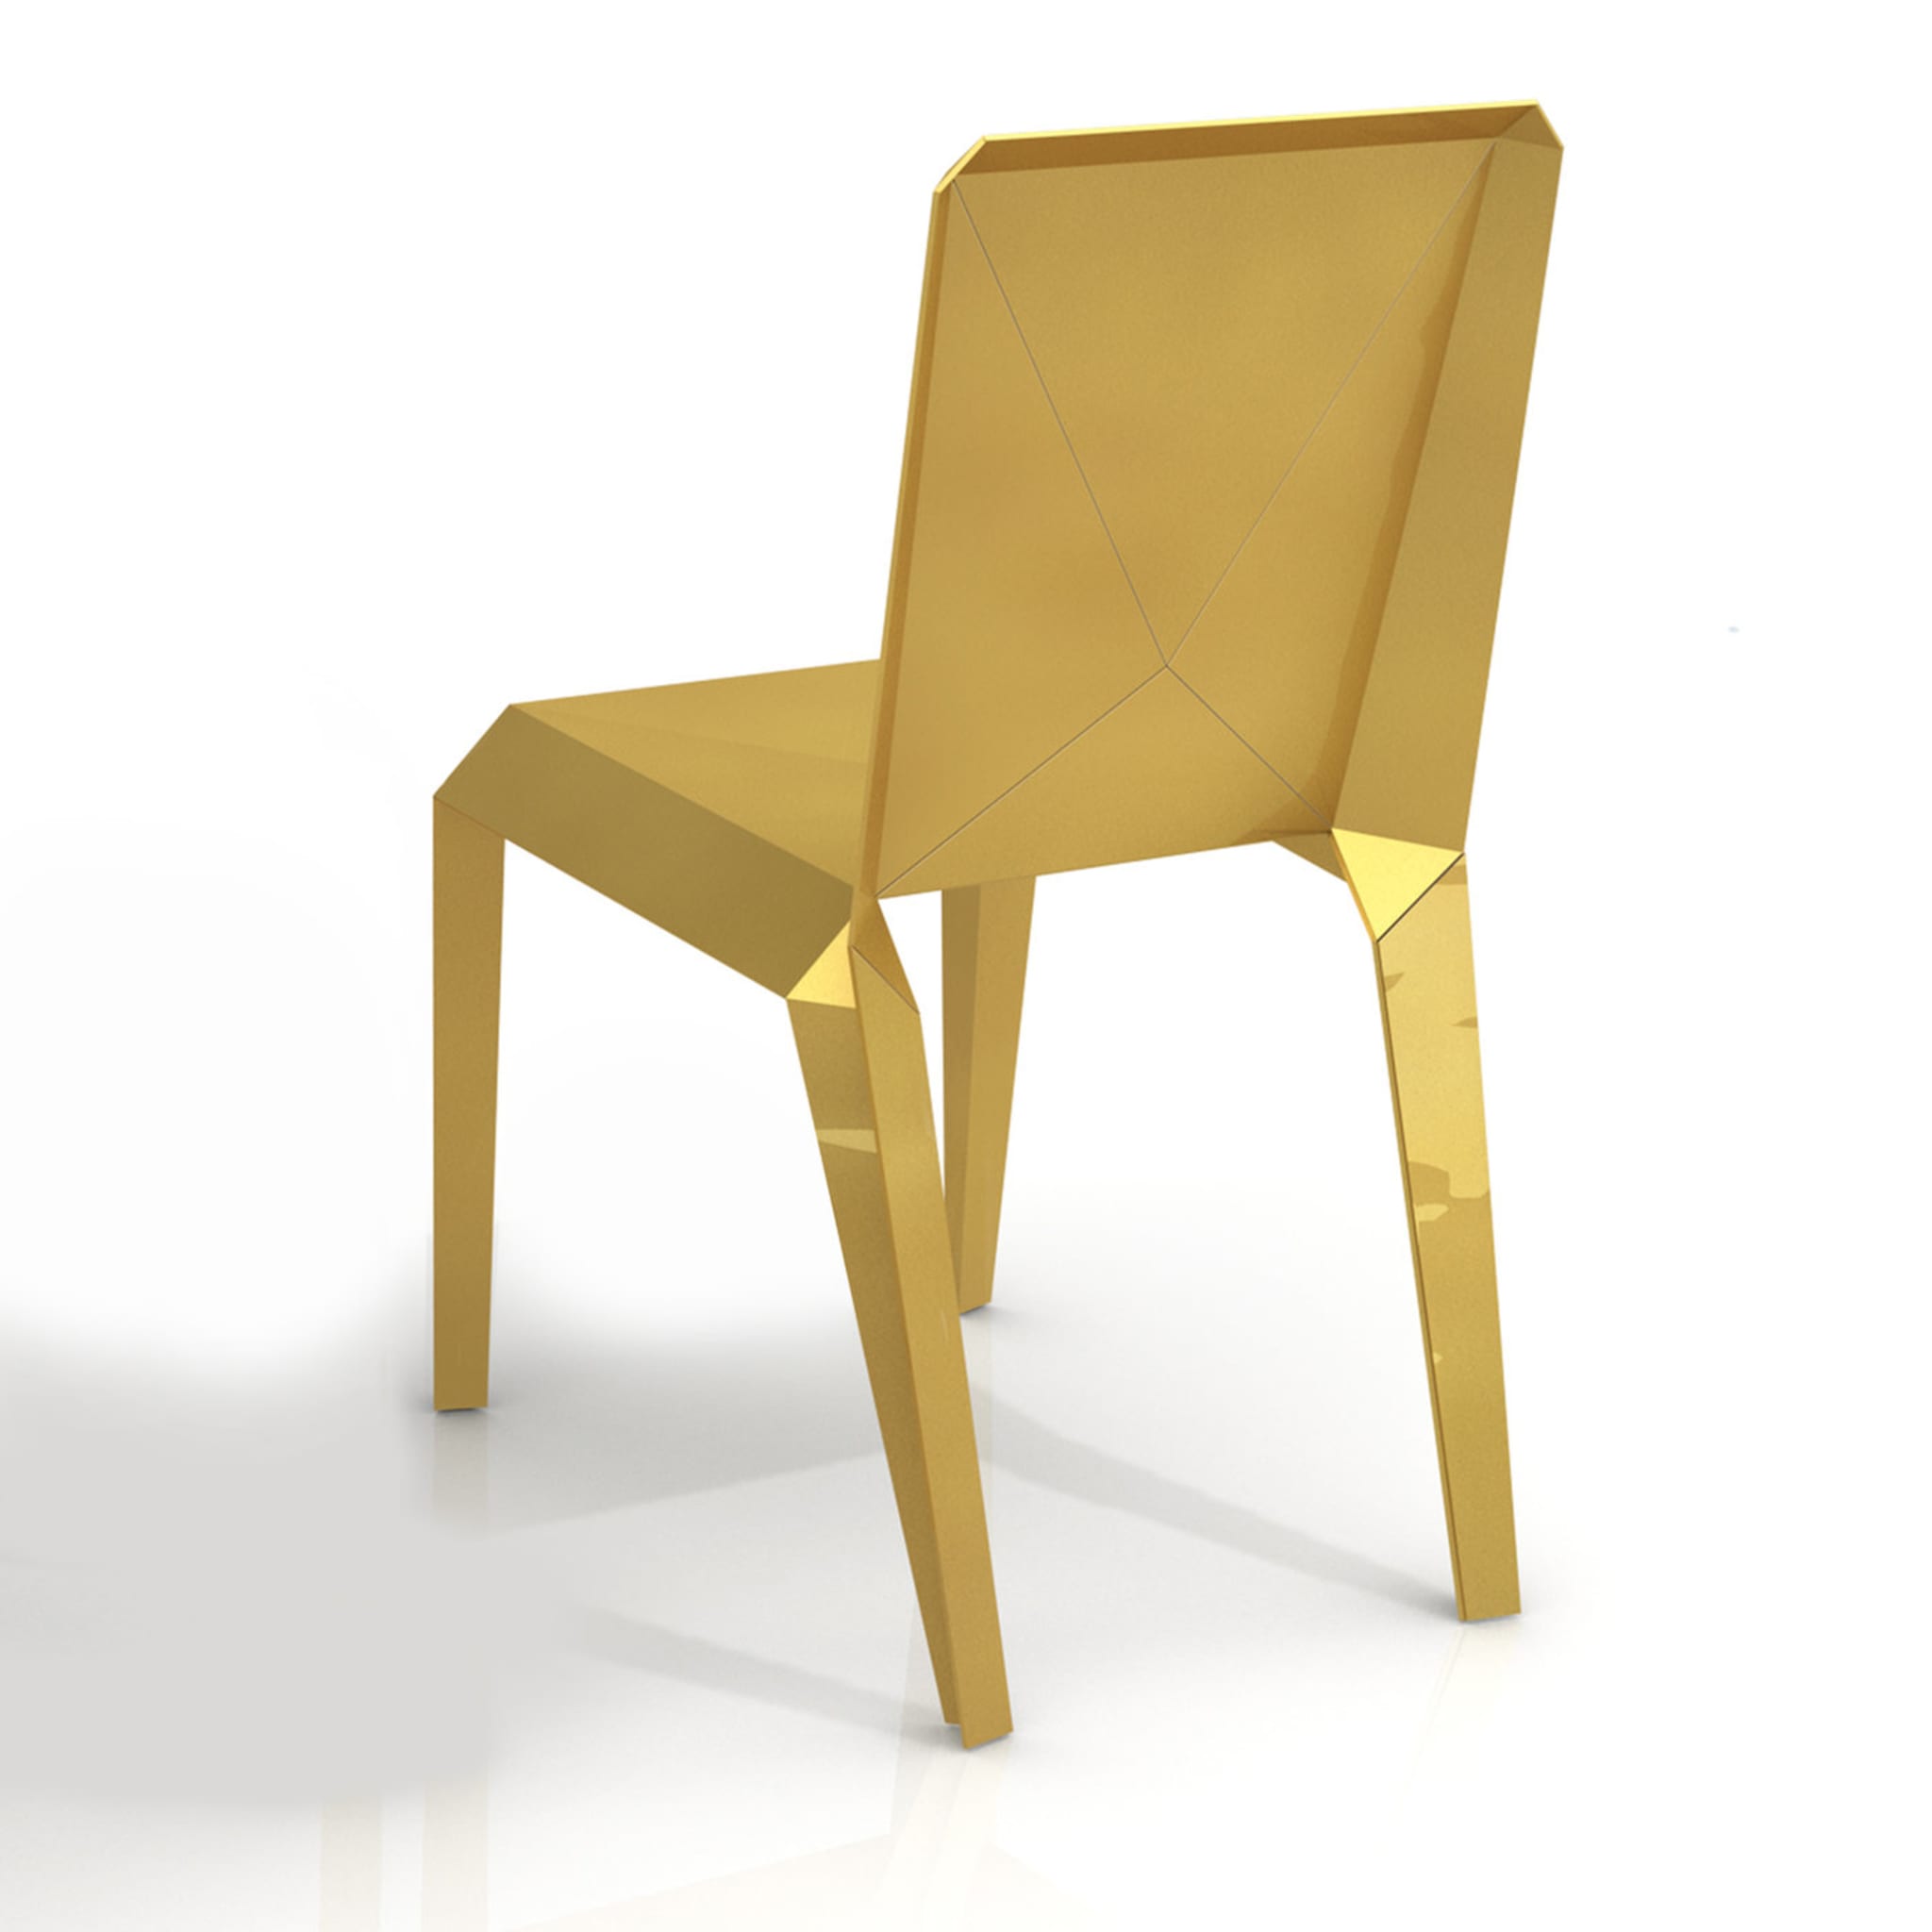 Lingotto Gold Chair by Garilab by Piter Perbellini - Alternative view 3